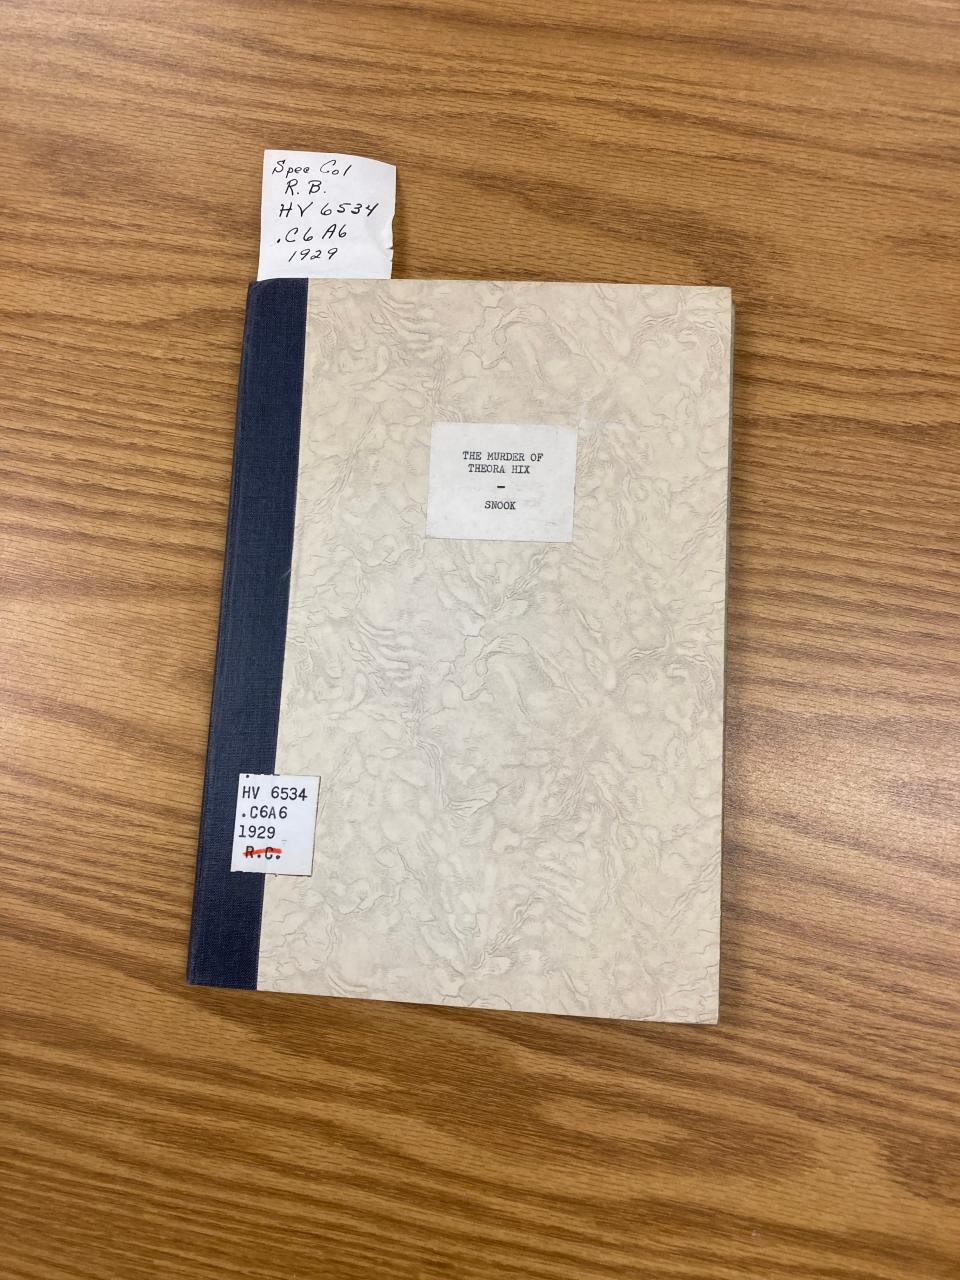 The University of Cincinnati's Archives and Rare Books Library houses one of the few surviving booklets of transcripts from the murder trial against Ohio State University veterinary medicine professor James Snook, convicted in the 1929 murder of coed Theora Hix.